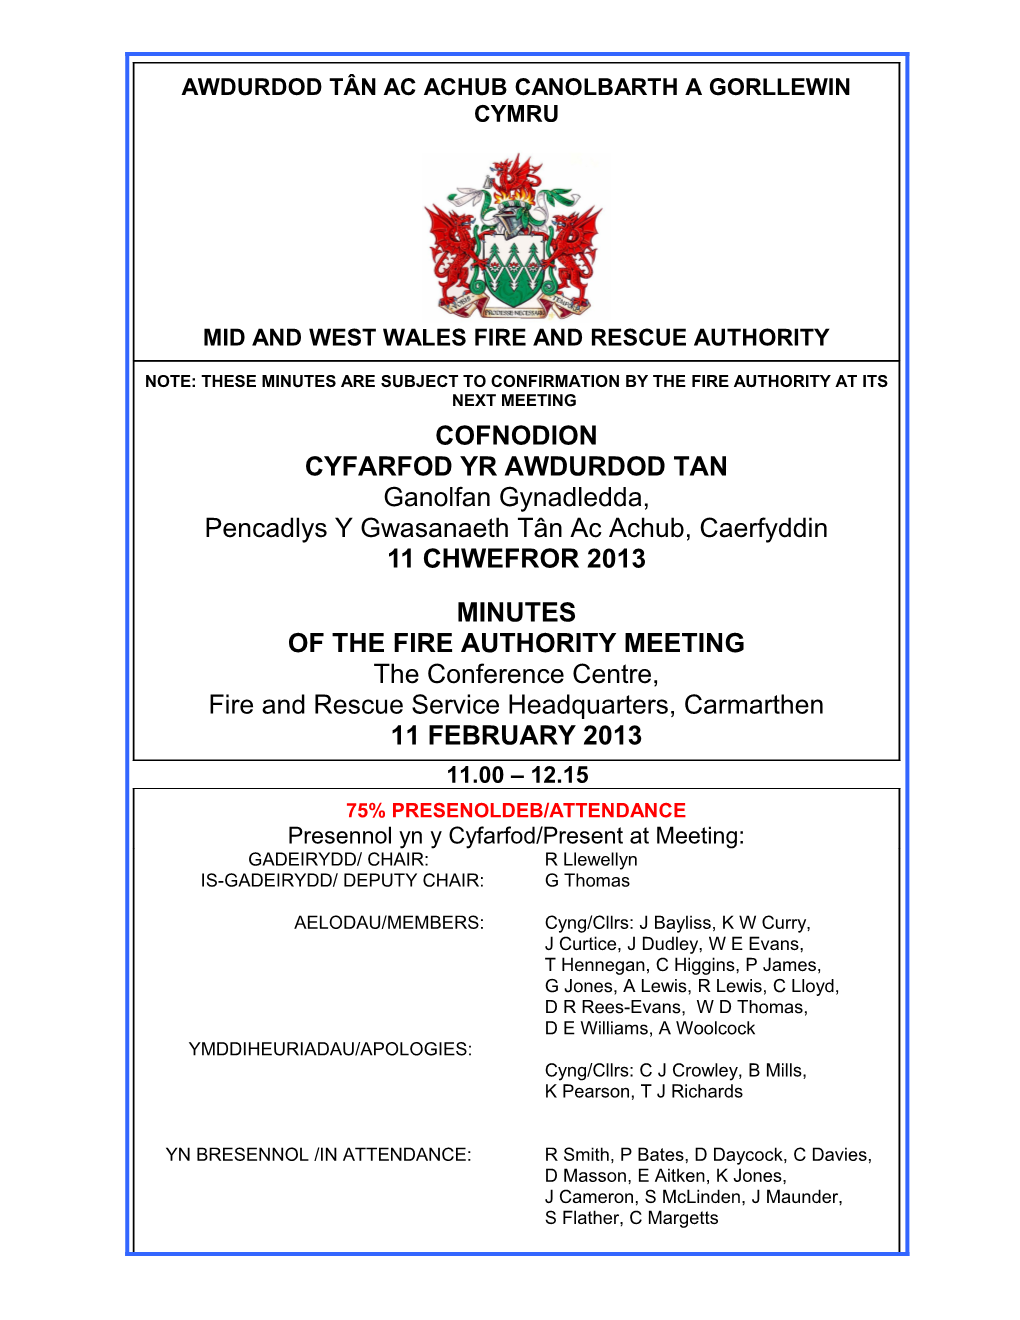 Fire Authority (FA) Committee Minutes 11 February 2013 (English)